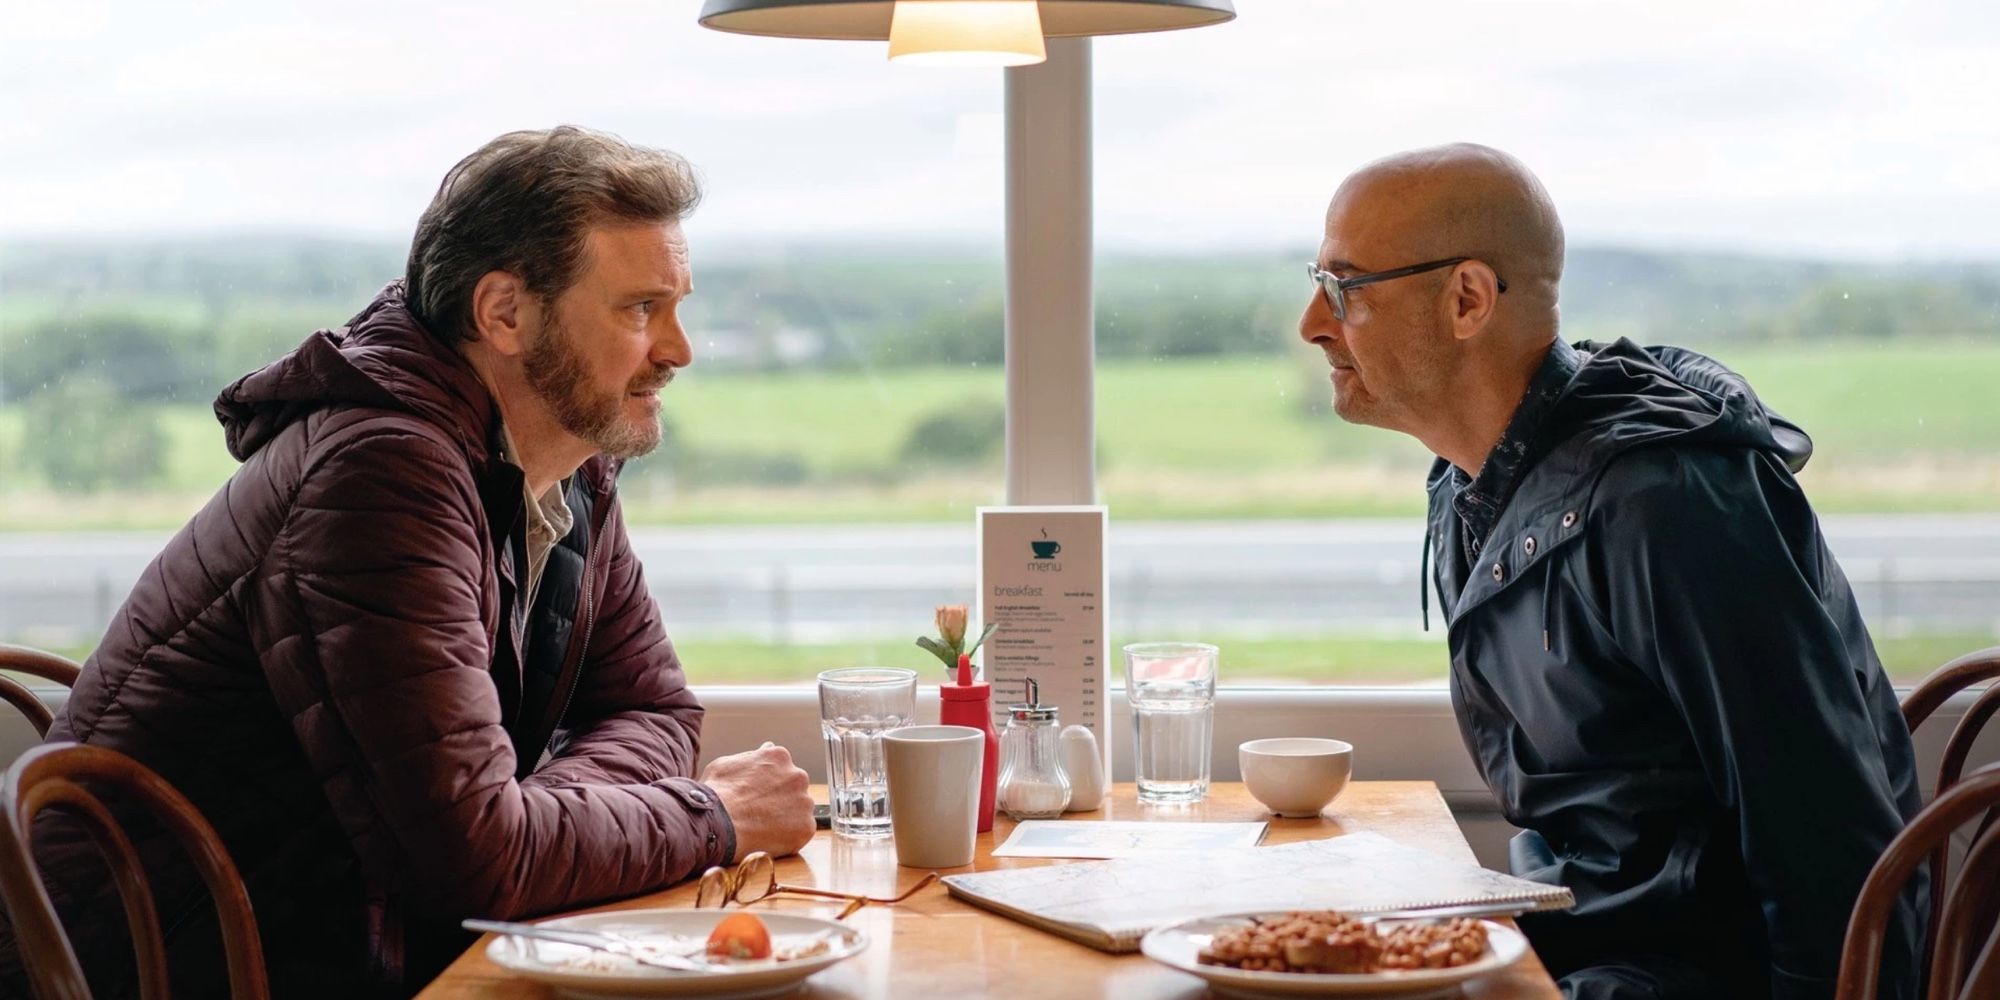 Colin Firth and Stanley Tucci eat lunch at a diner in Supernova.